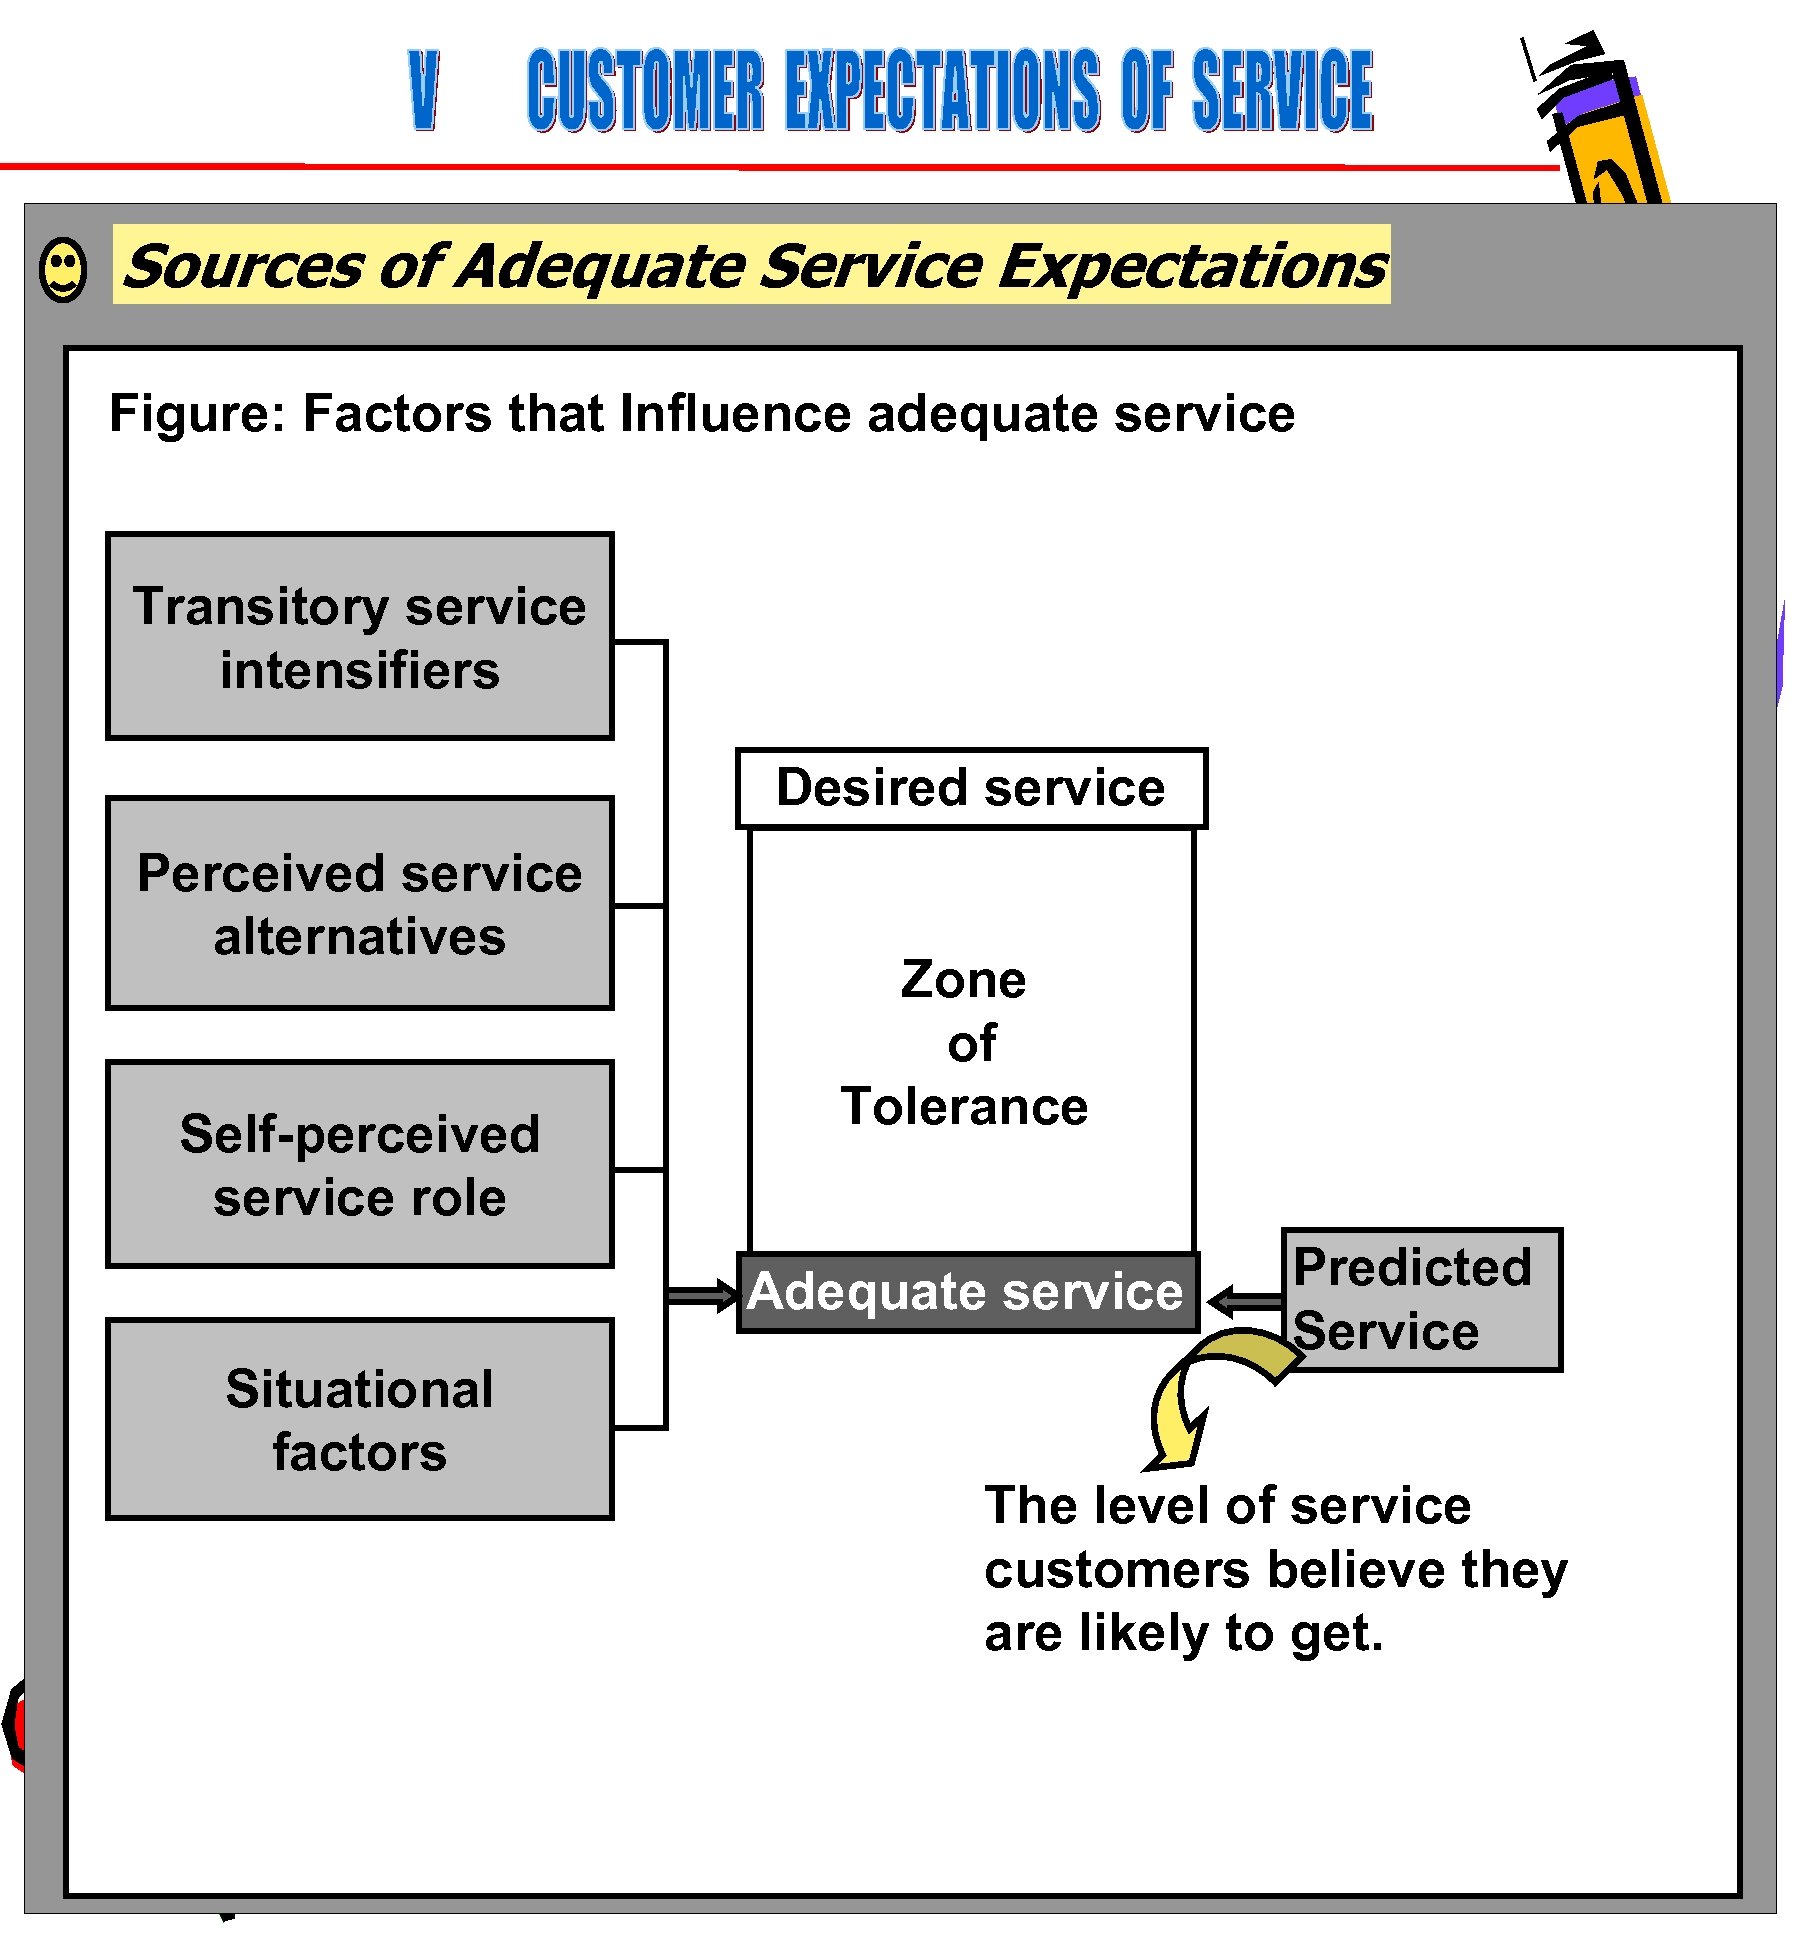 Sources of Adequate Service Expectations Figure: Factors that Influence adequate service Transitory service intensifiers